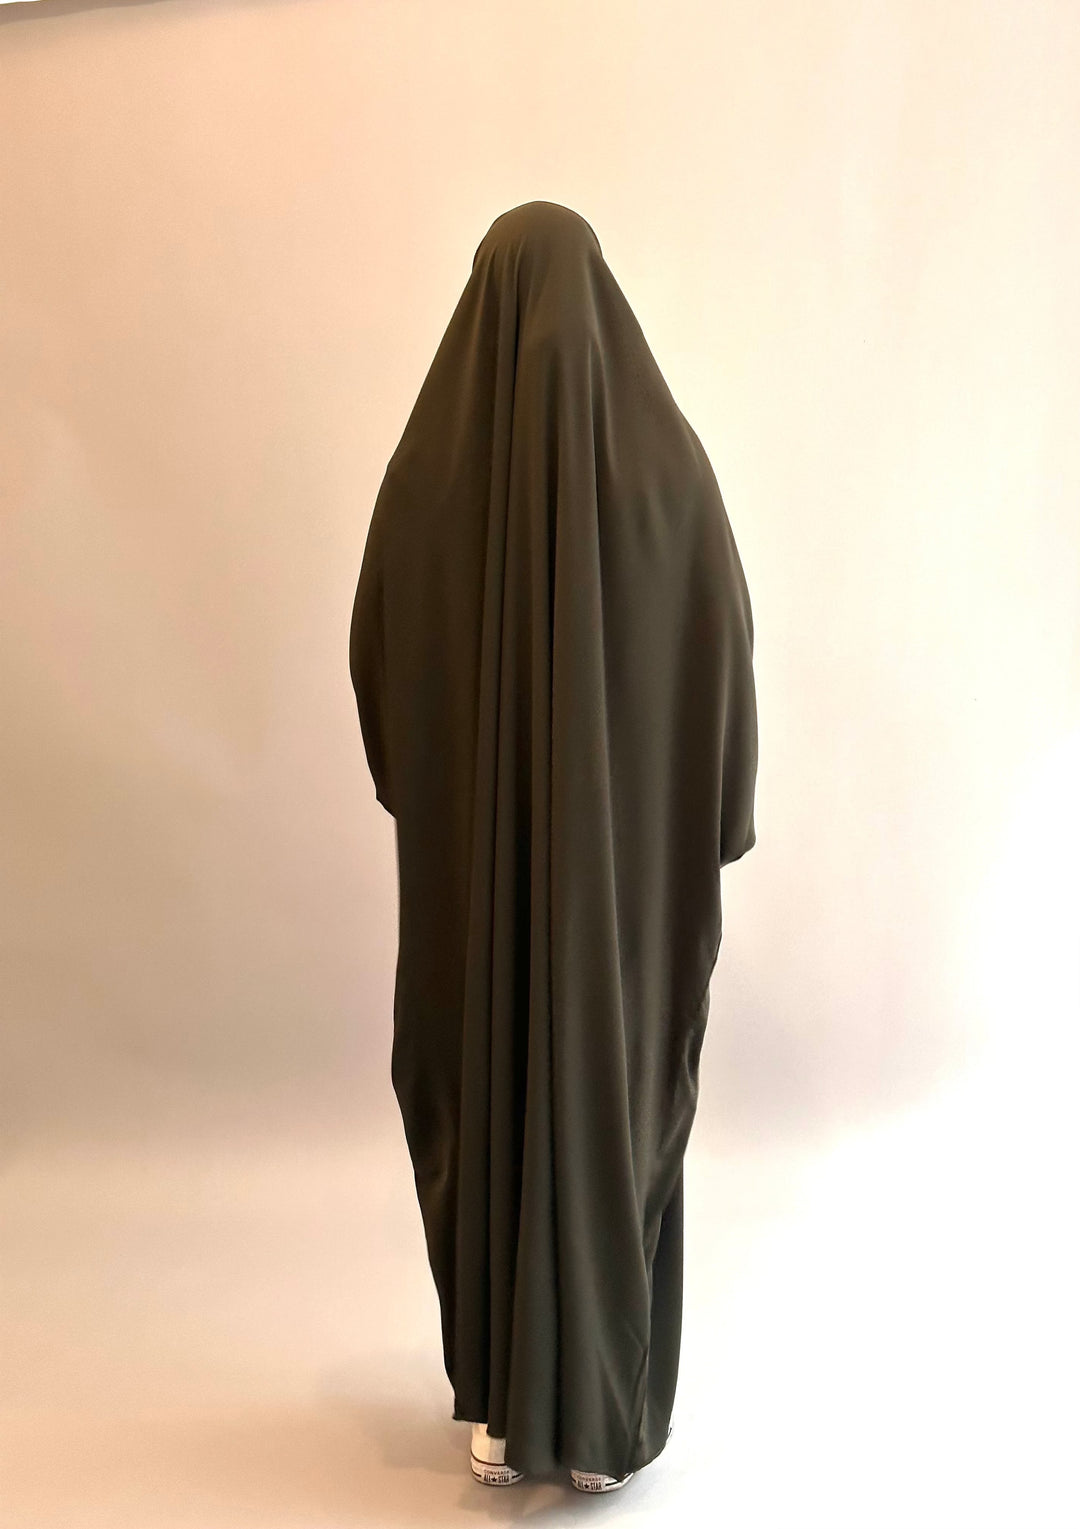 Get trendy with Sarah Niqab Jilbab - Olive Green -  available at Voilee NY. Grab yours for $17.99 today!